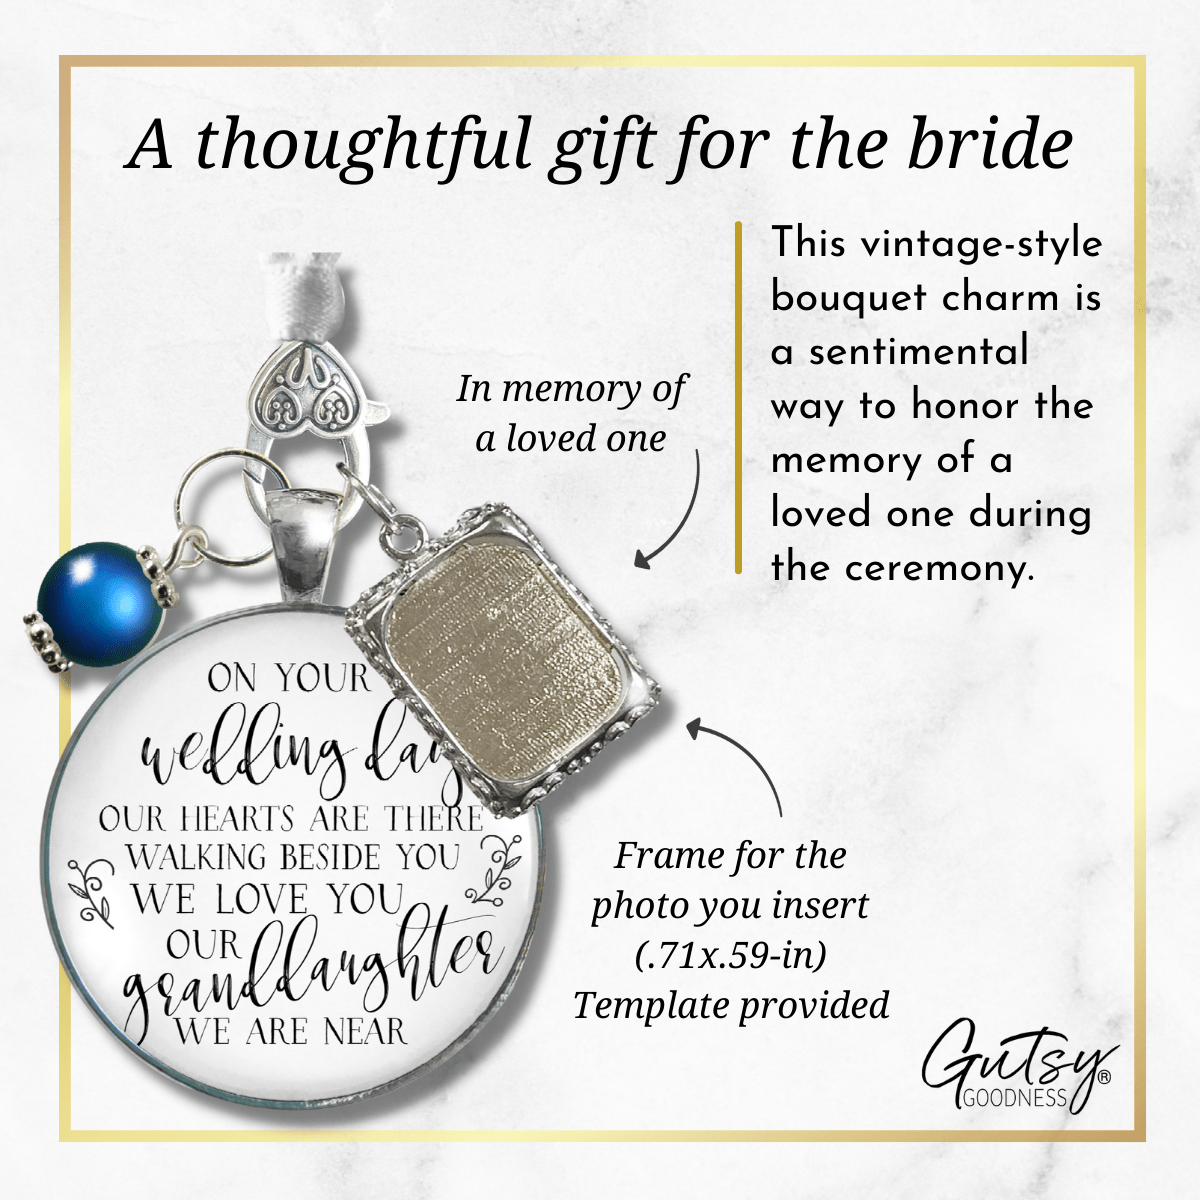 Bridal Bouquet Charm Grandparent Memorial Picture Frames Wedding Silver Blue 1 Frame Jewelry